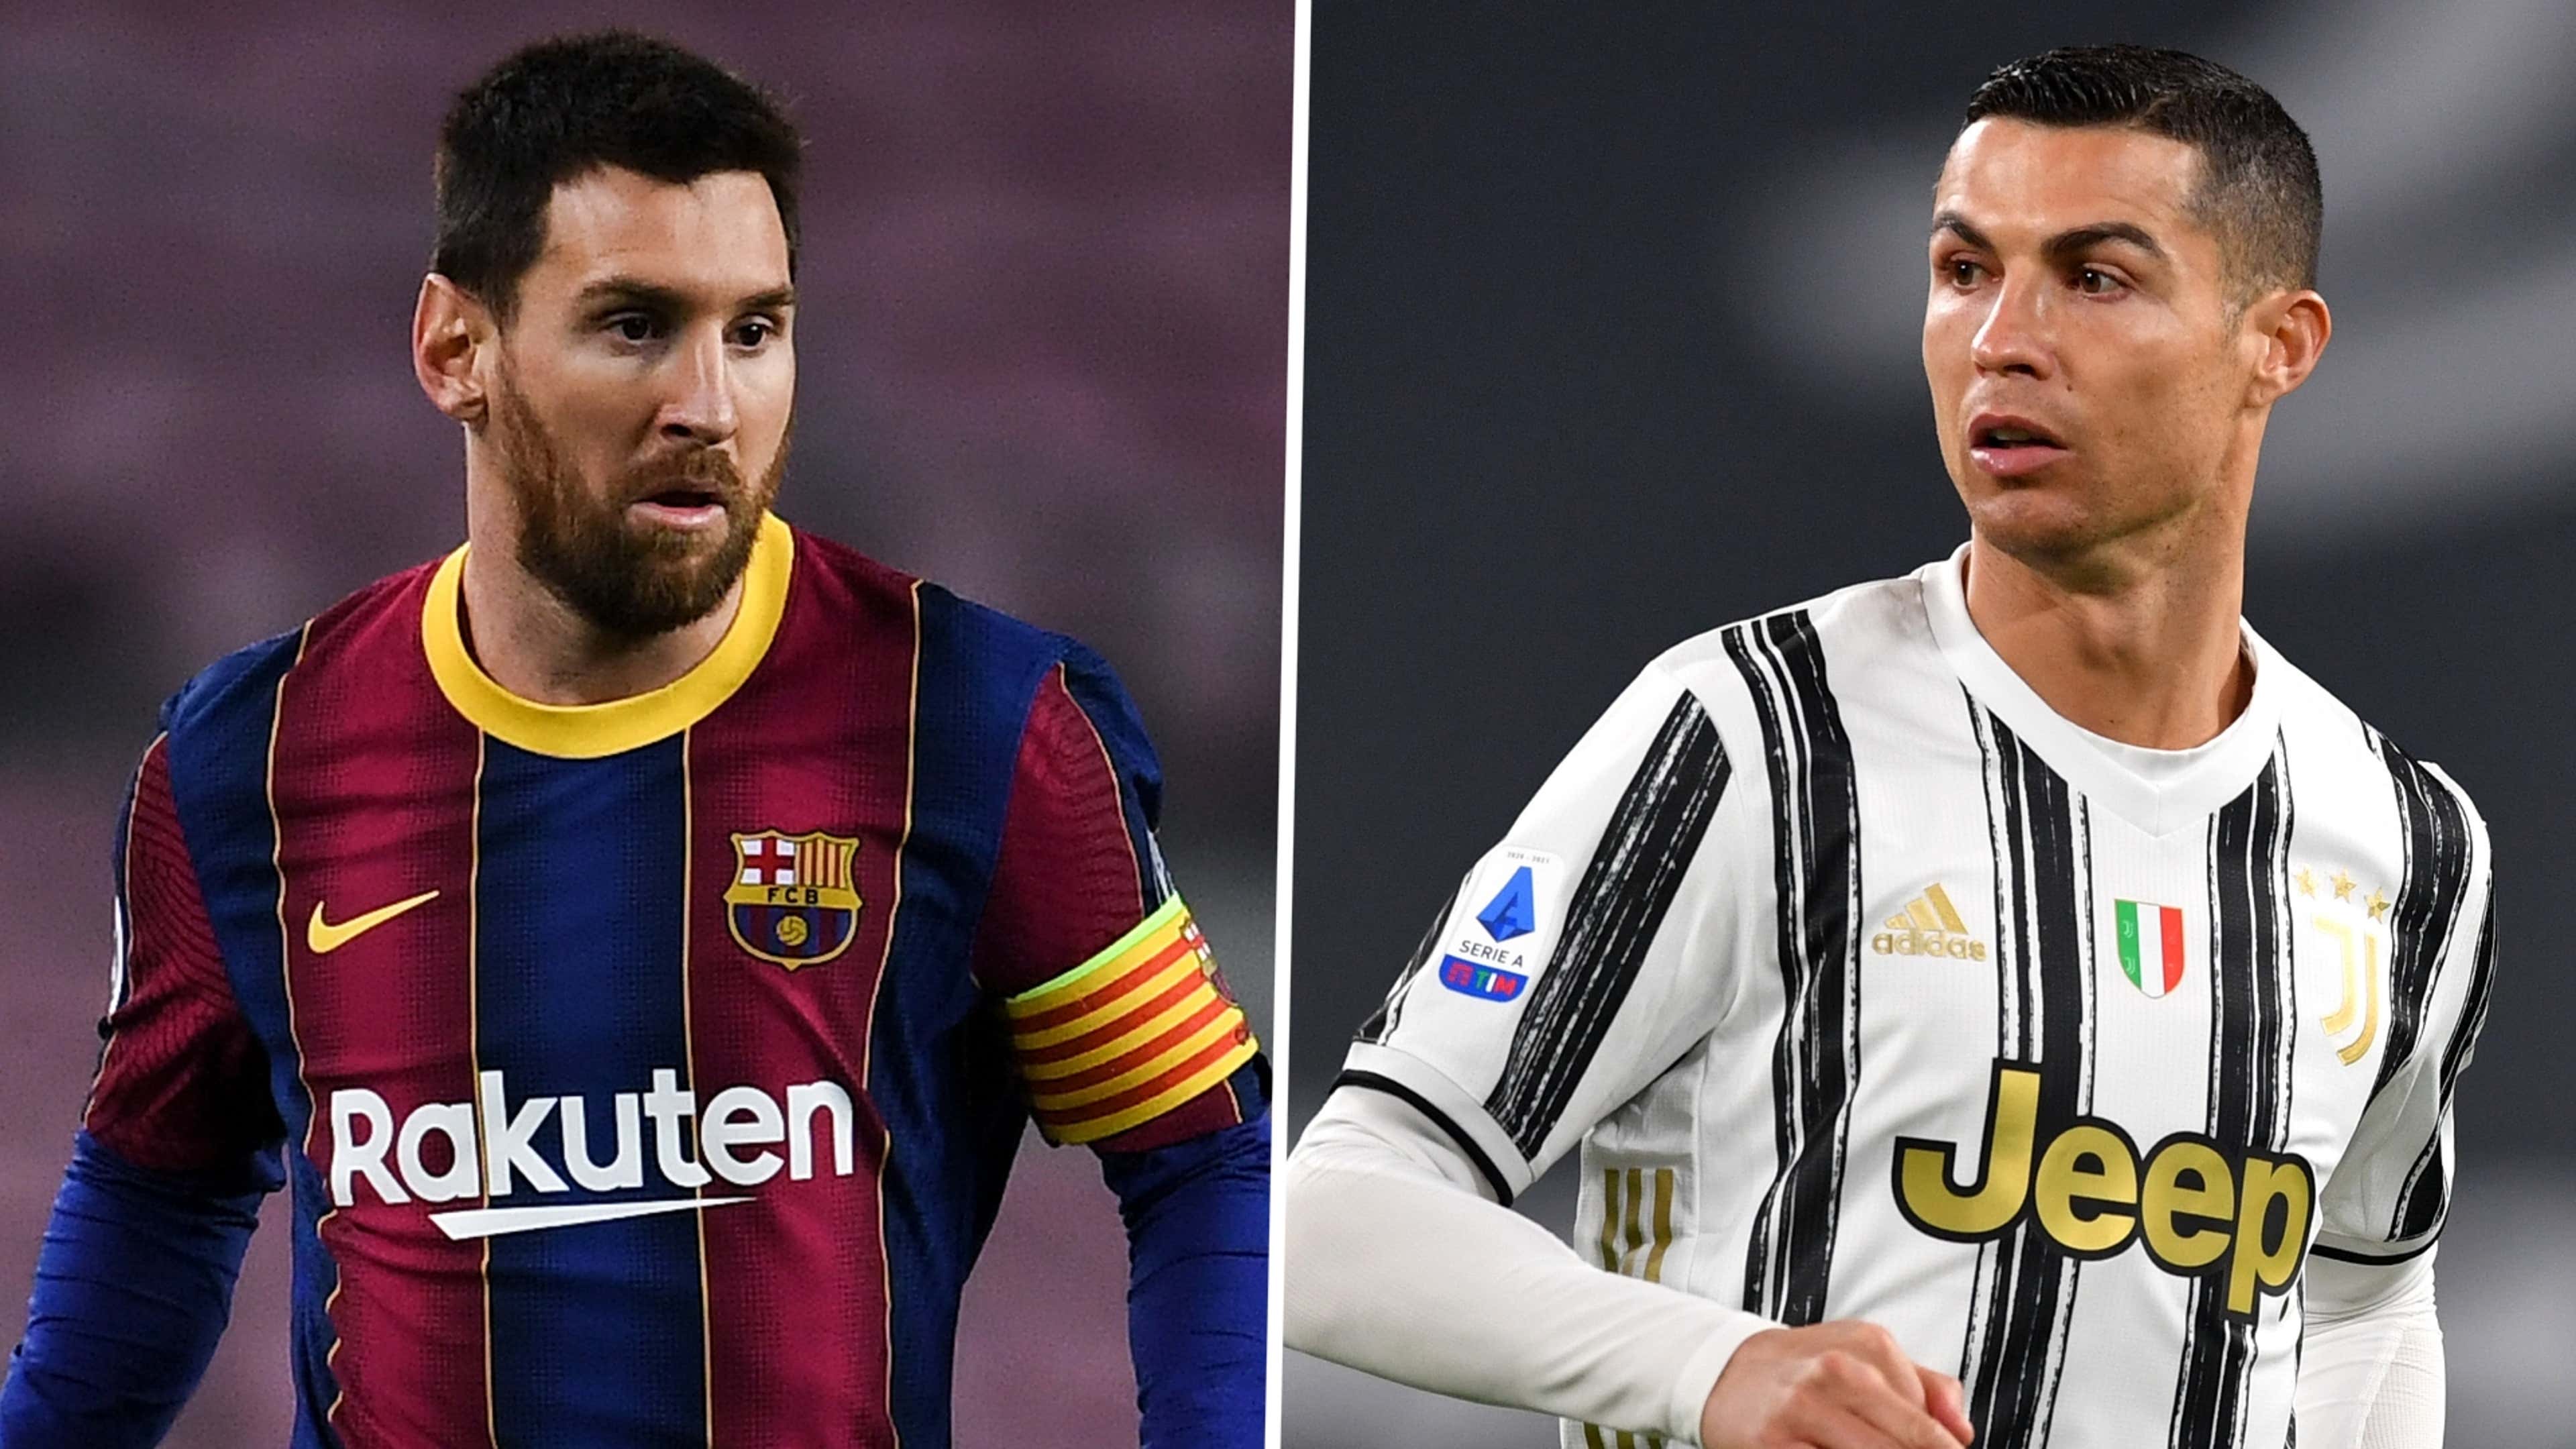 Four players who could be the next Messi or Ronaldo